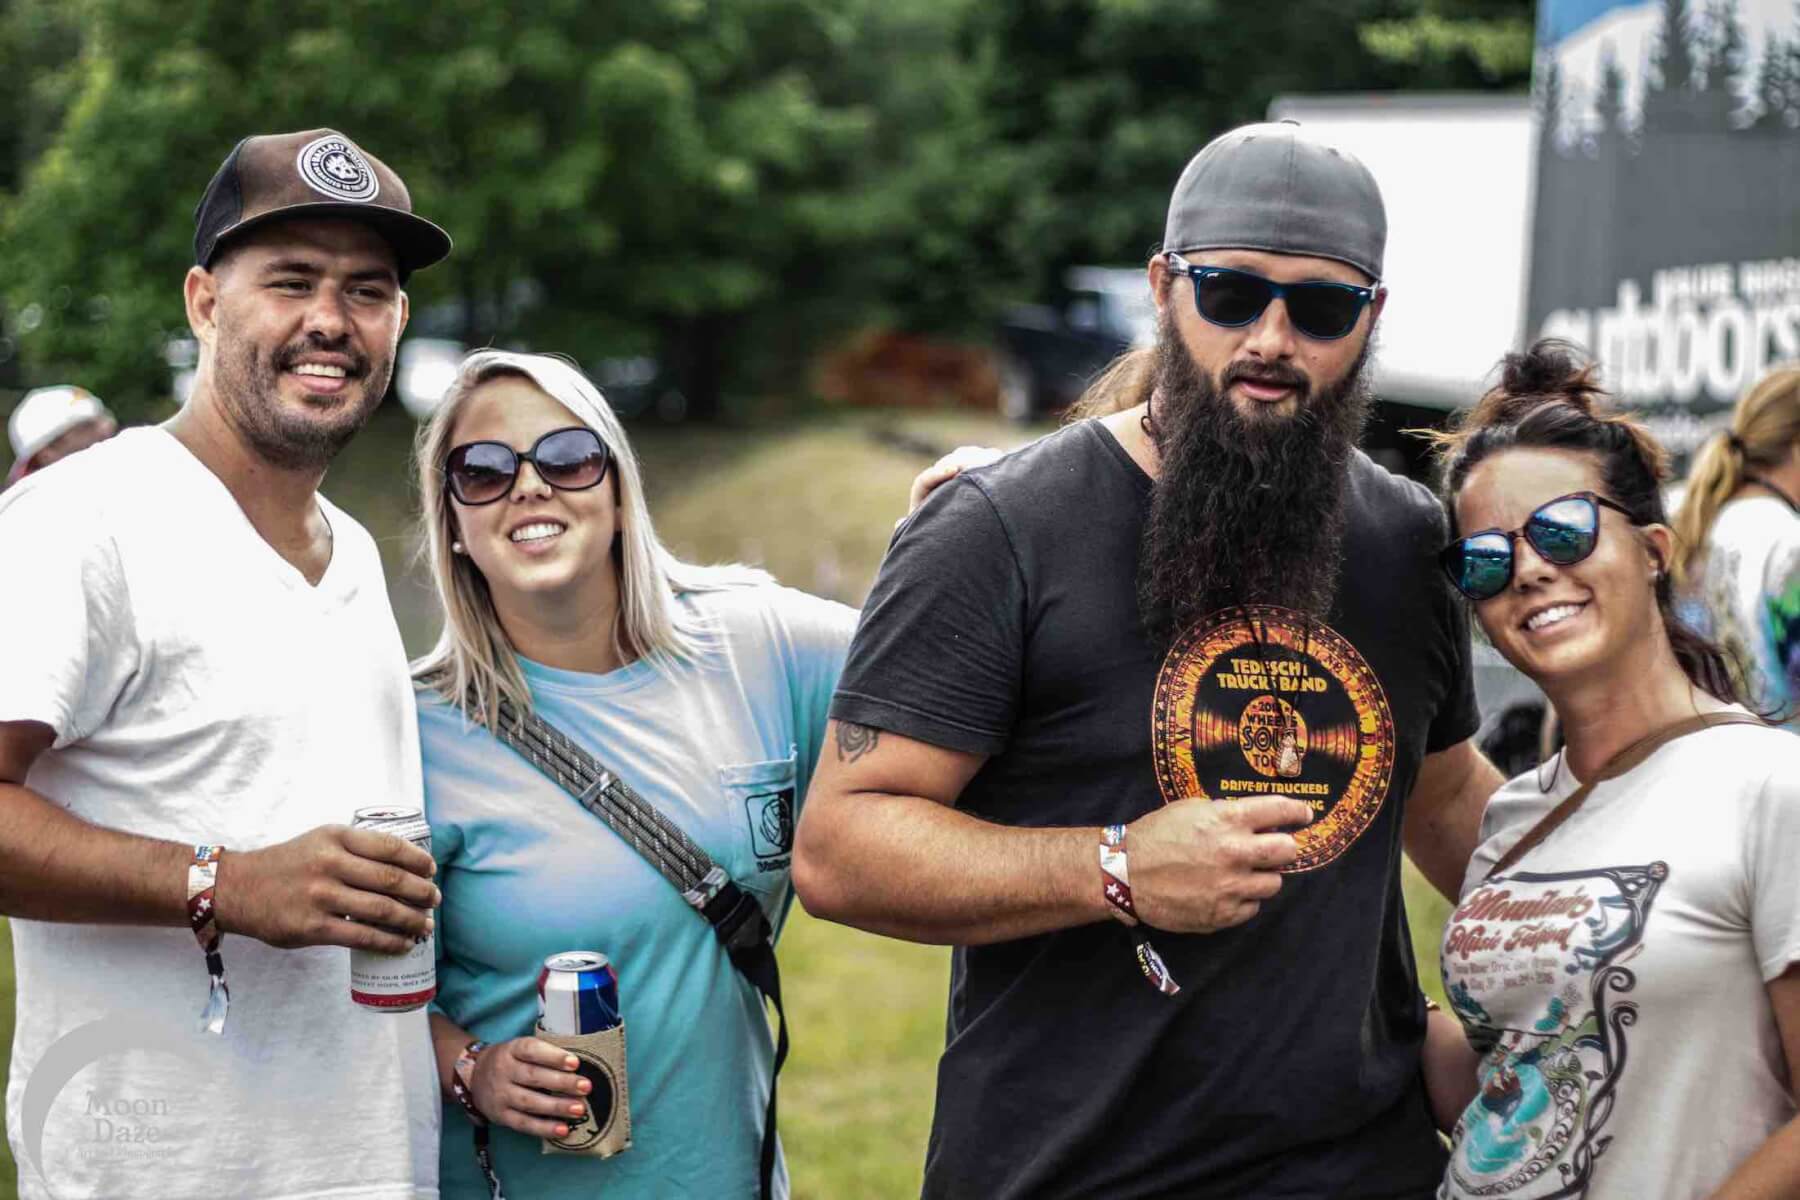 vip fans at mountain music festival ace adventure resort west virginia